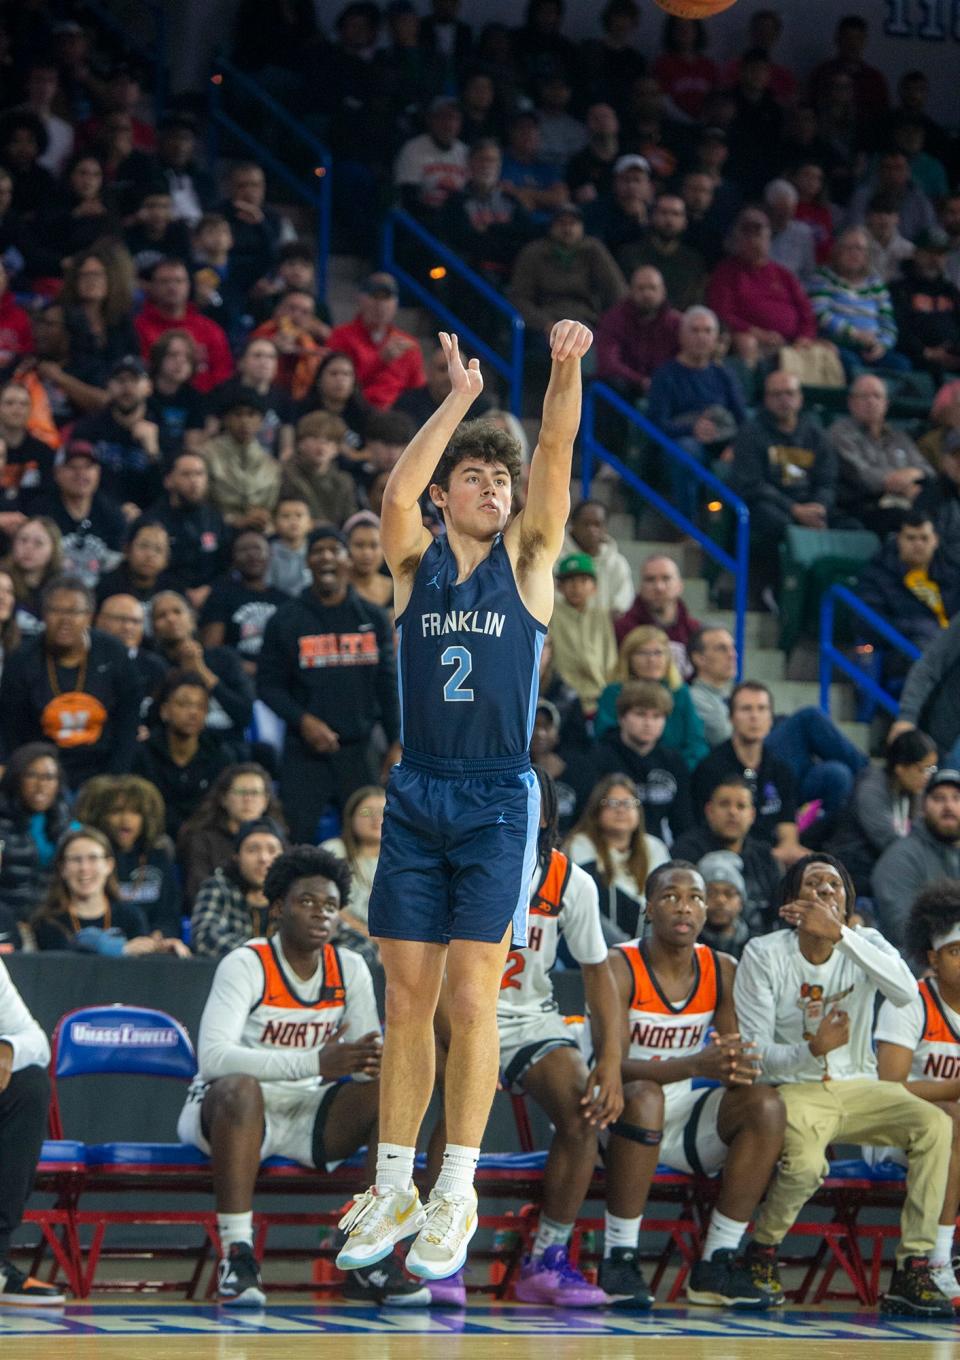 Franklin High School senior captain Andrew O'Neill launches a jump shot against Worcester North in the Div. 1 state boys basketball final at the Tsongas Center in Lowell, March 17, 2024.